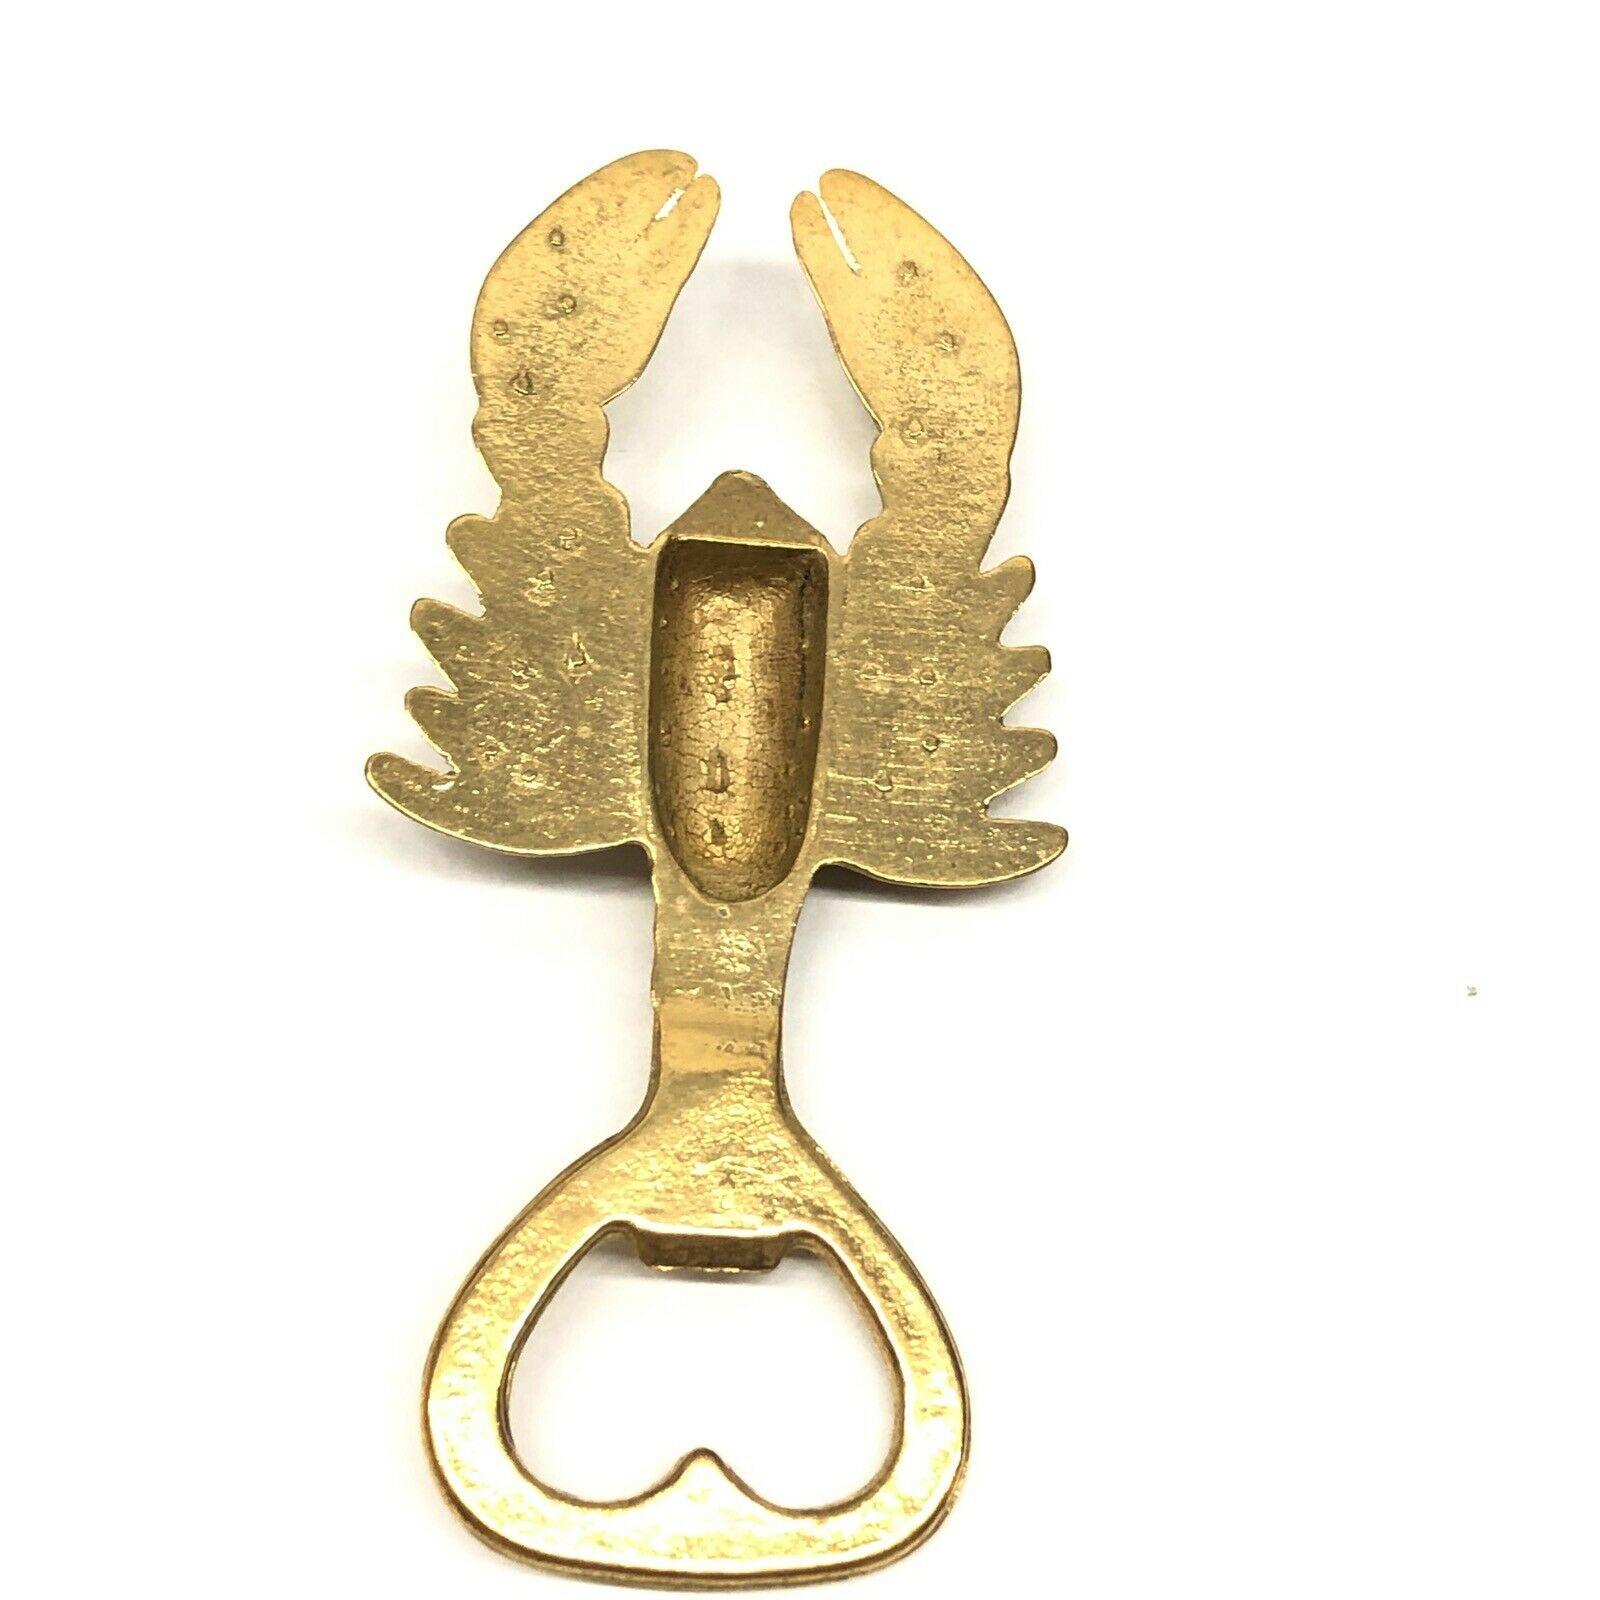 Classic early 1950s Austrian bottle opener. Nice addition to your room or just for your collection of Austrian midcentury items. Found at an estate sale in Vienna, Austria.